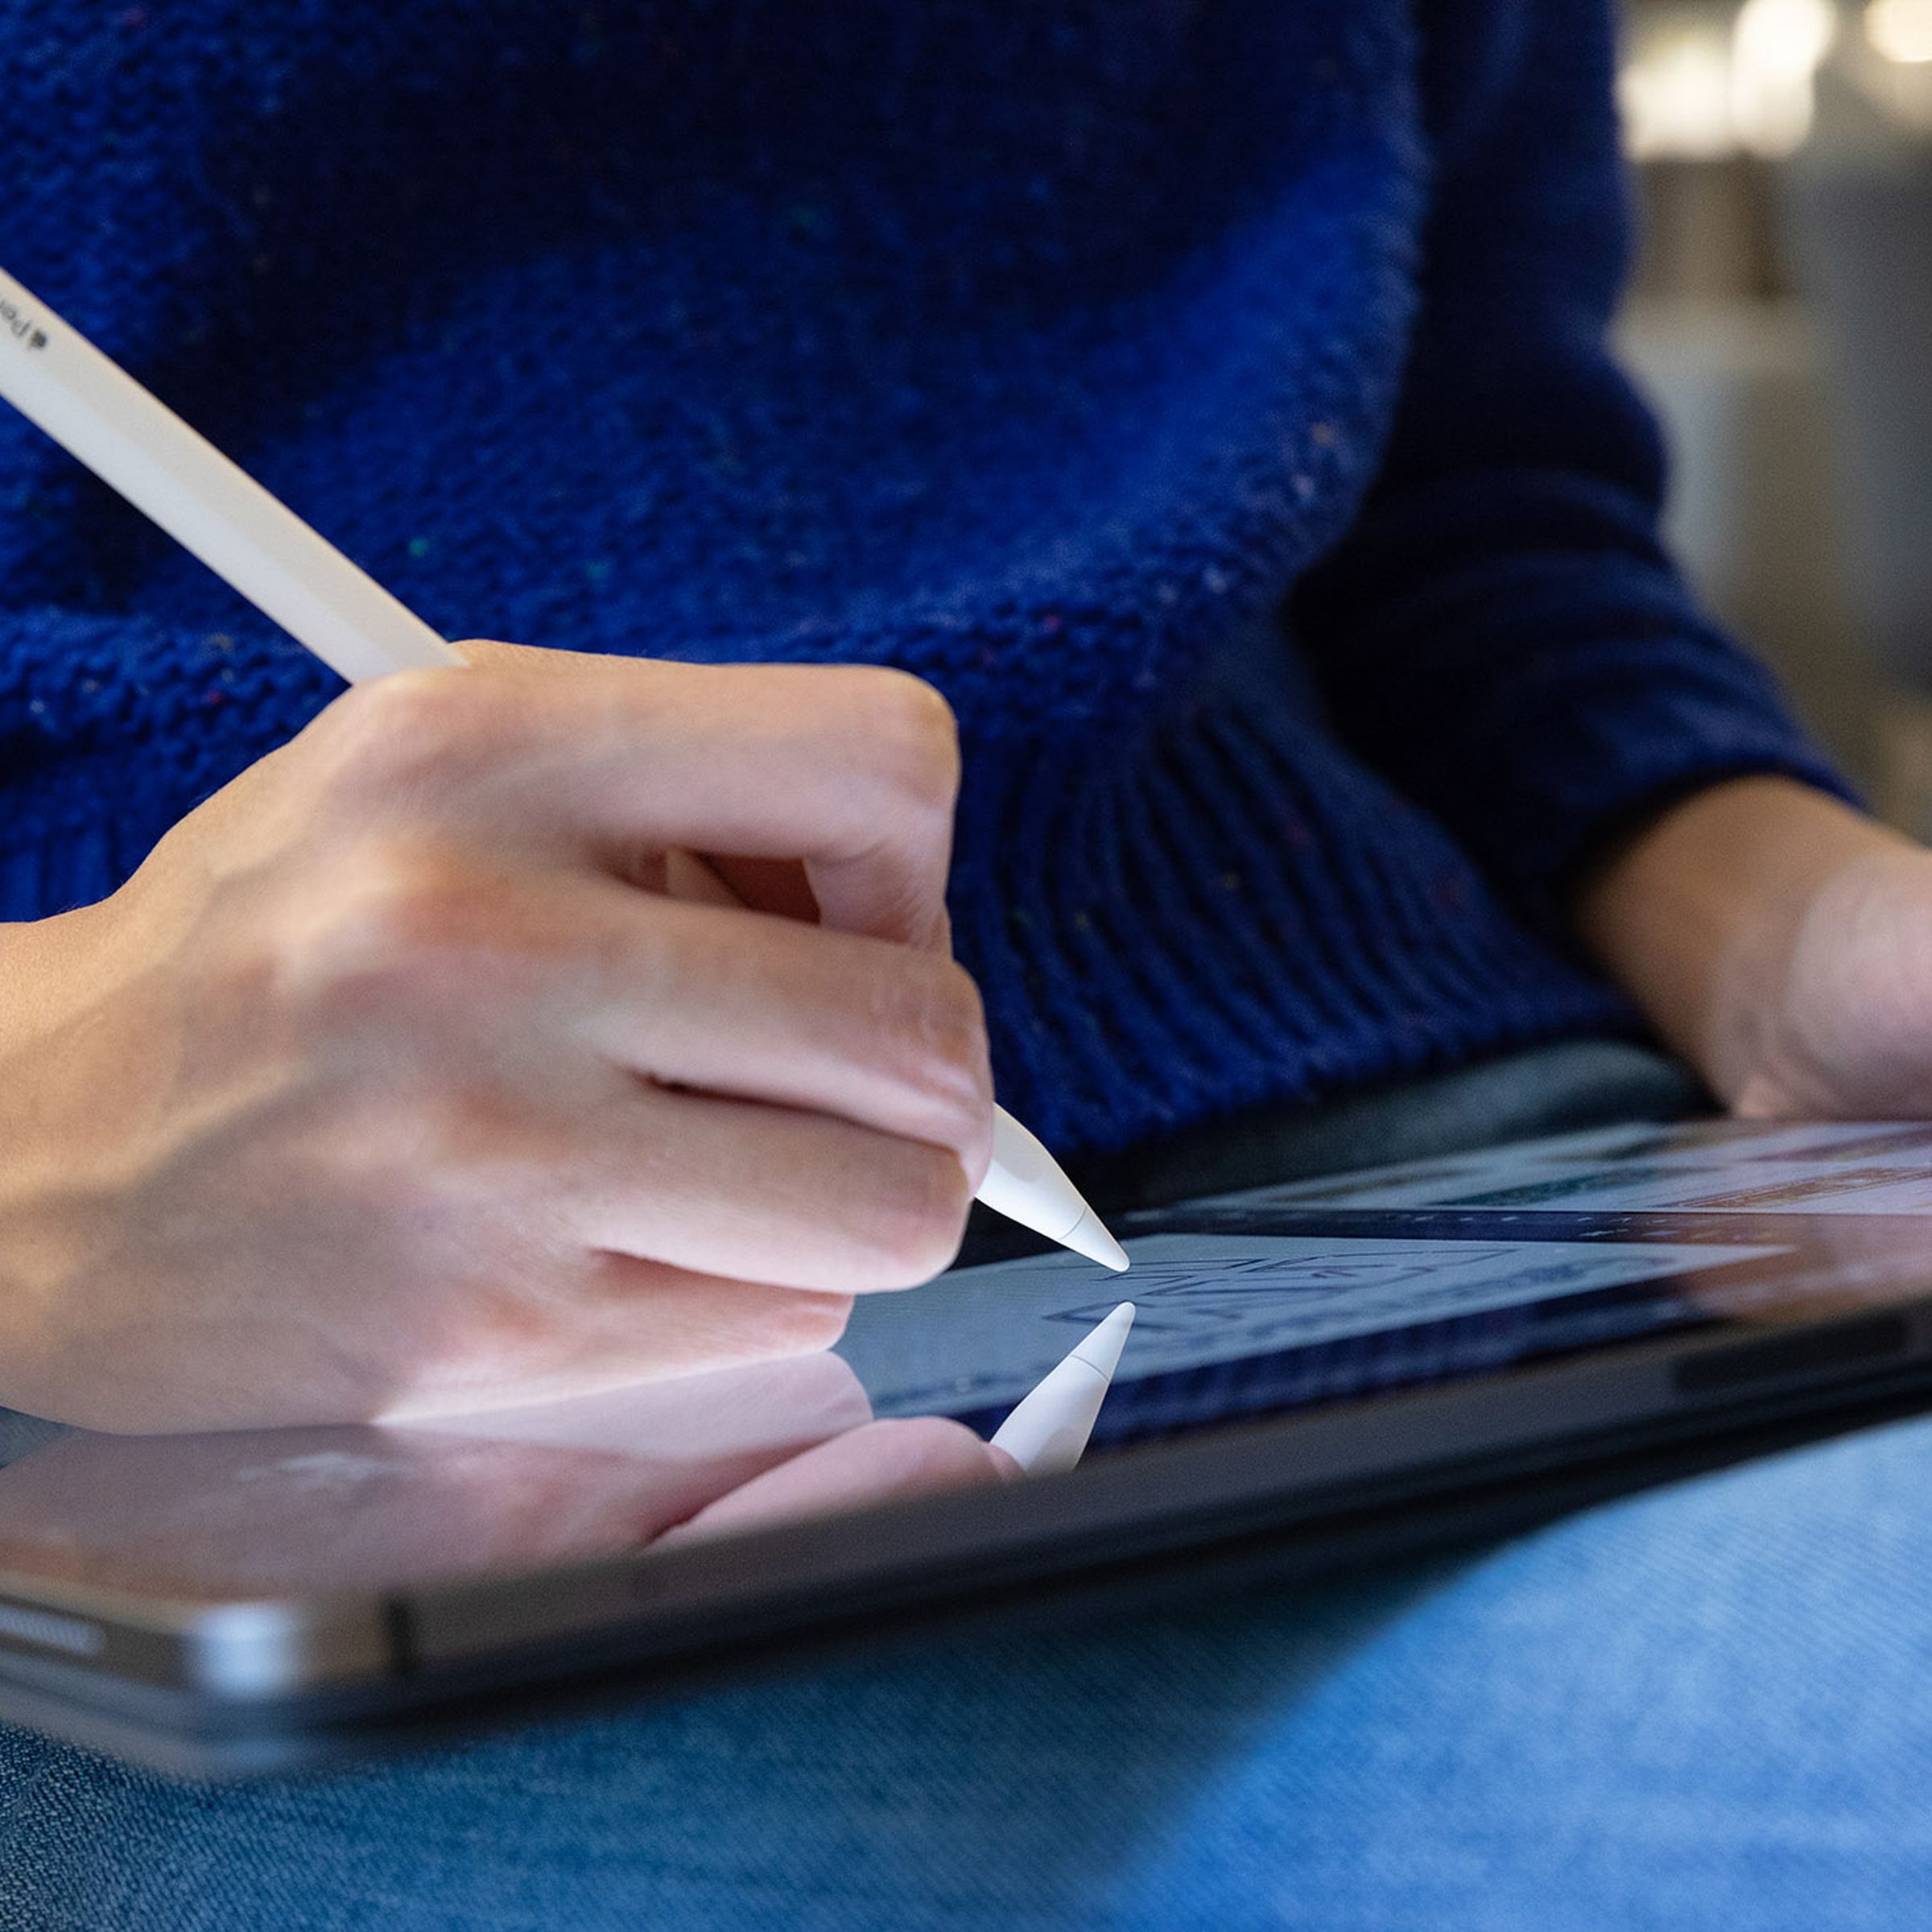 A photo of Apple’s second-gen Apple Pencil being used on an iPad Pro.